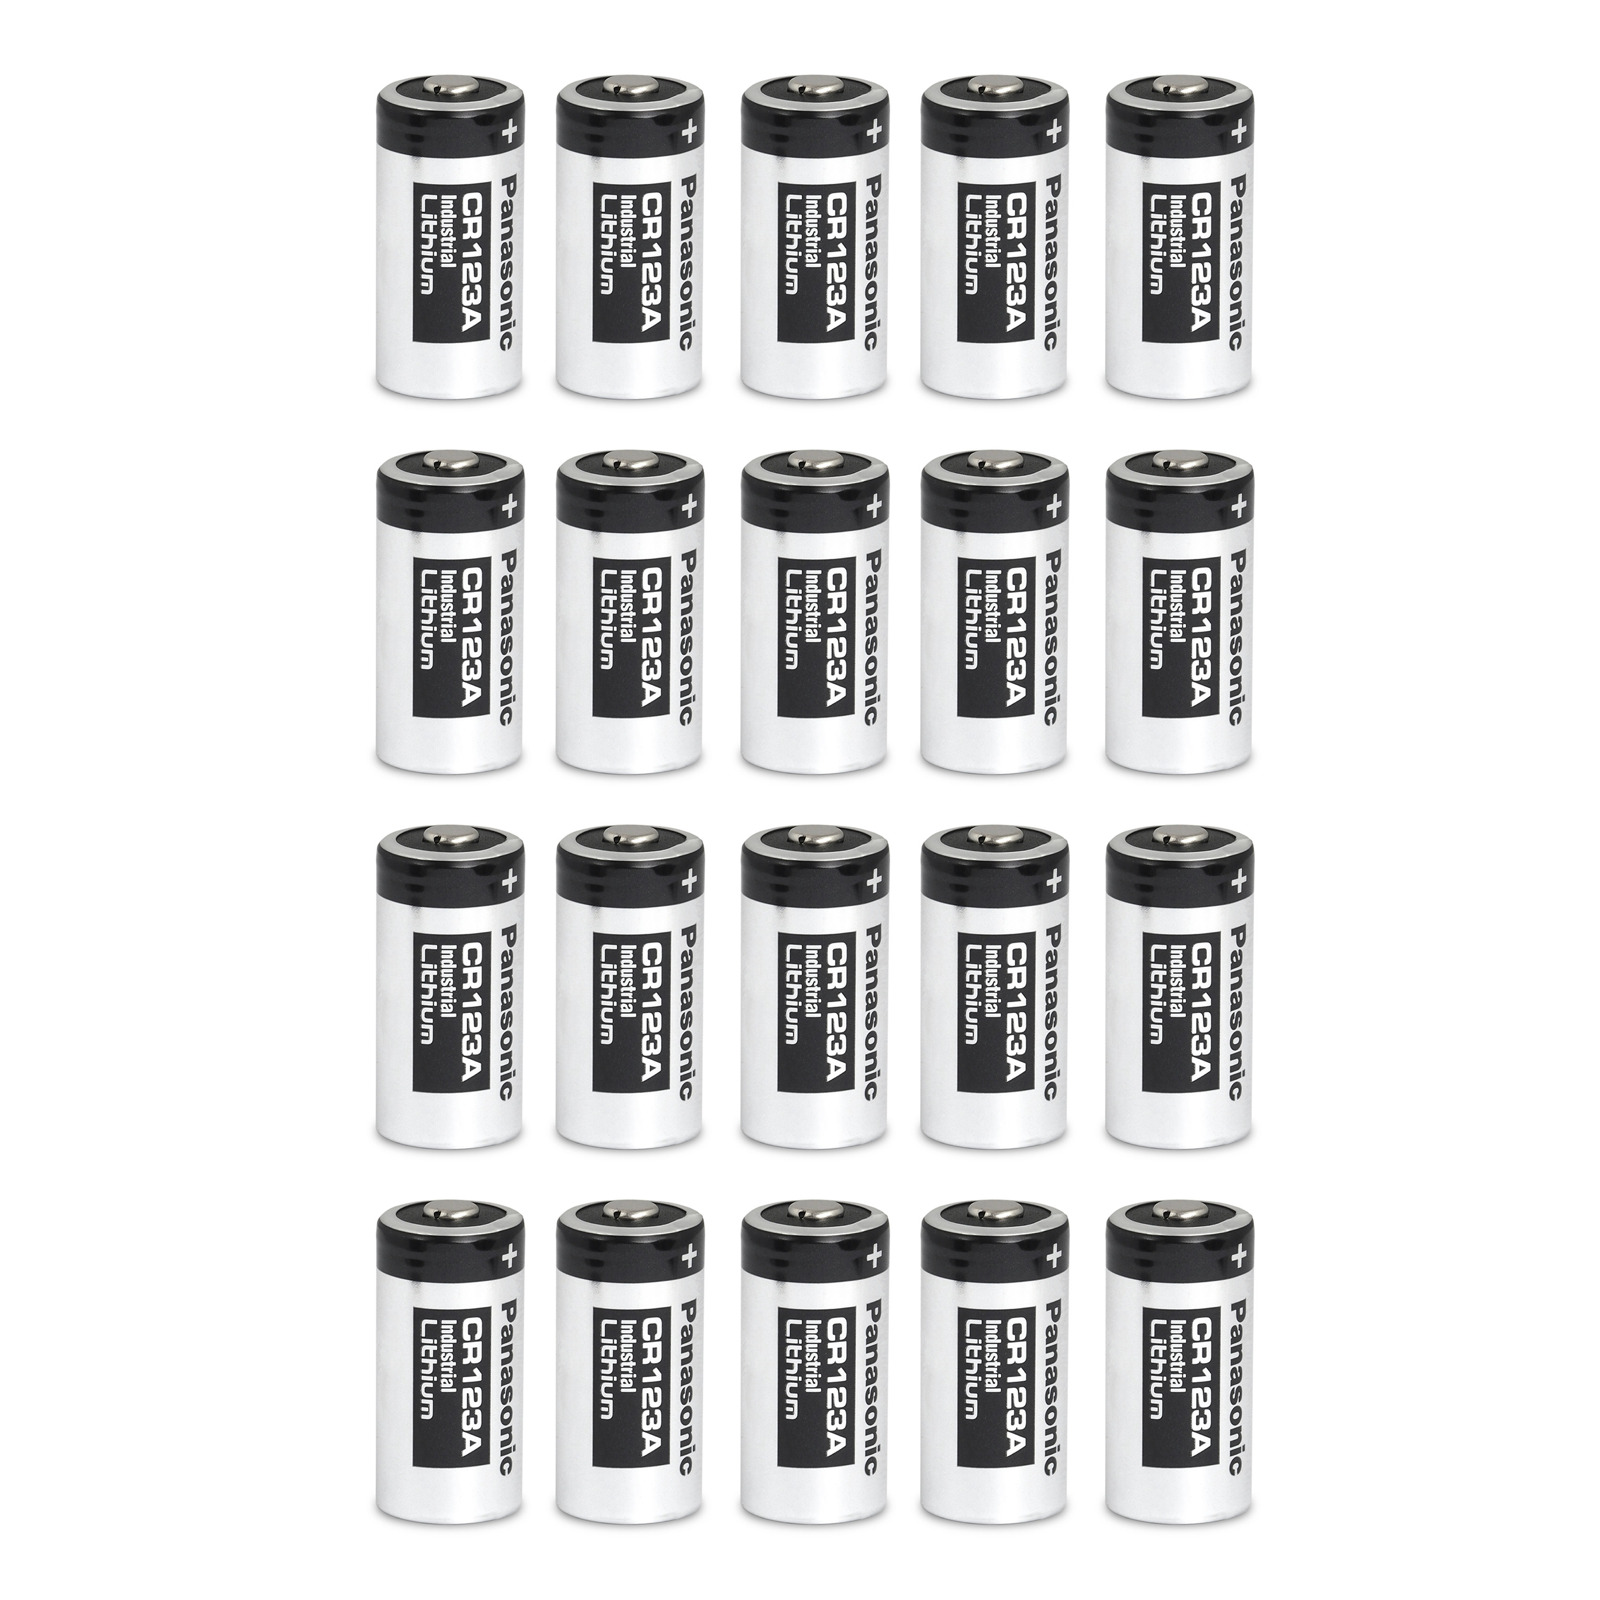 Panasonic CR123A 3V Industrial Lithium Batteries (Silver/Black) (20 Pack) +Track